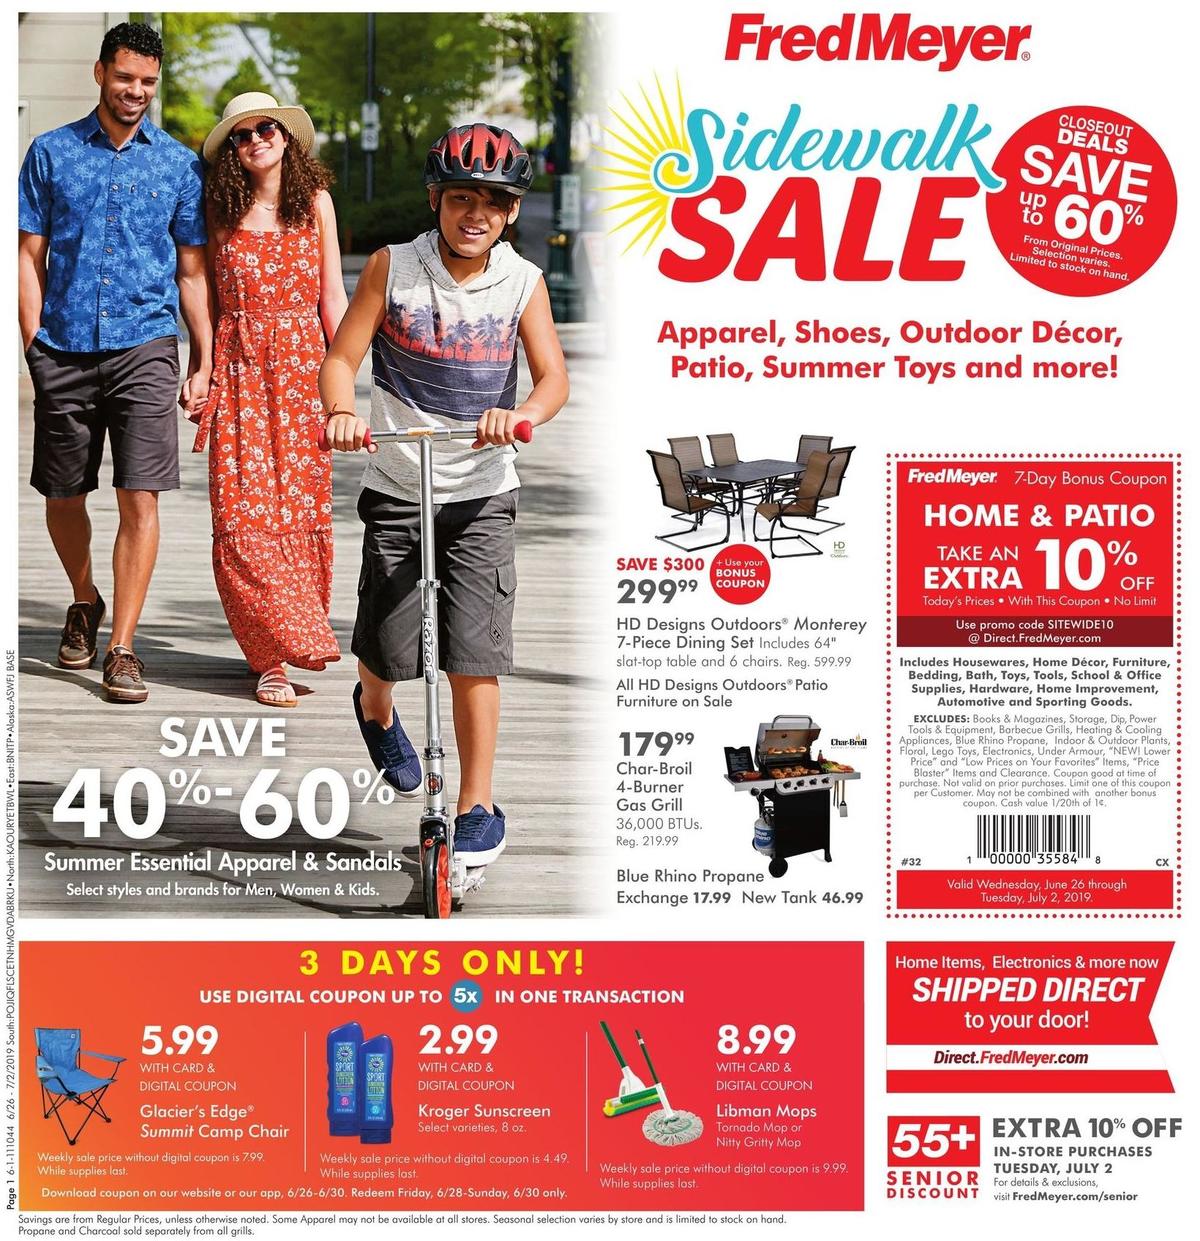 Fred Meyer General Merchandise Weekly Ad & Specials from June 26